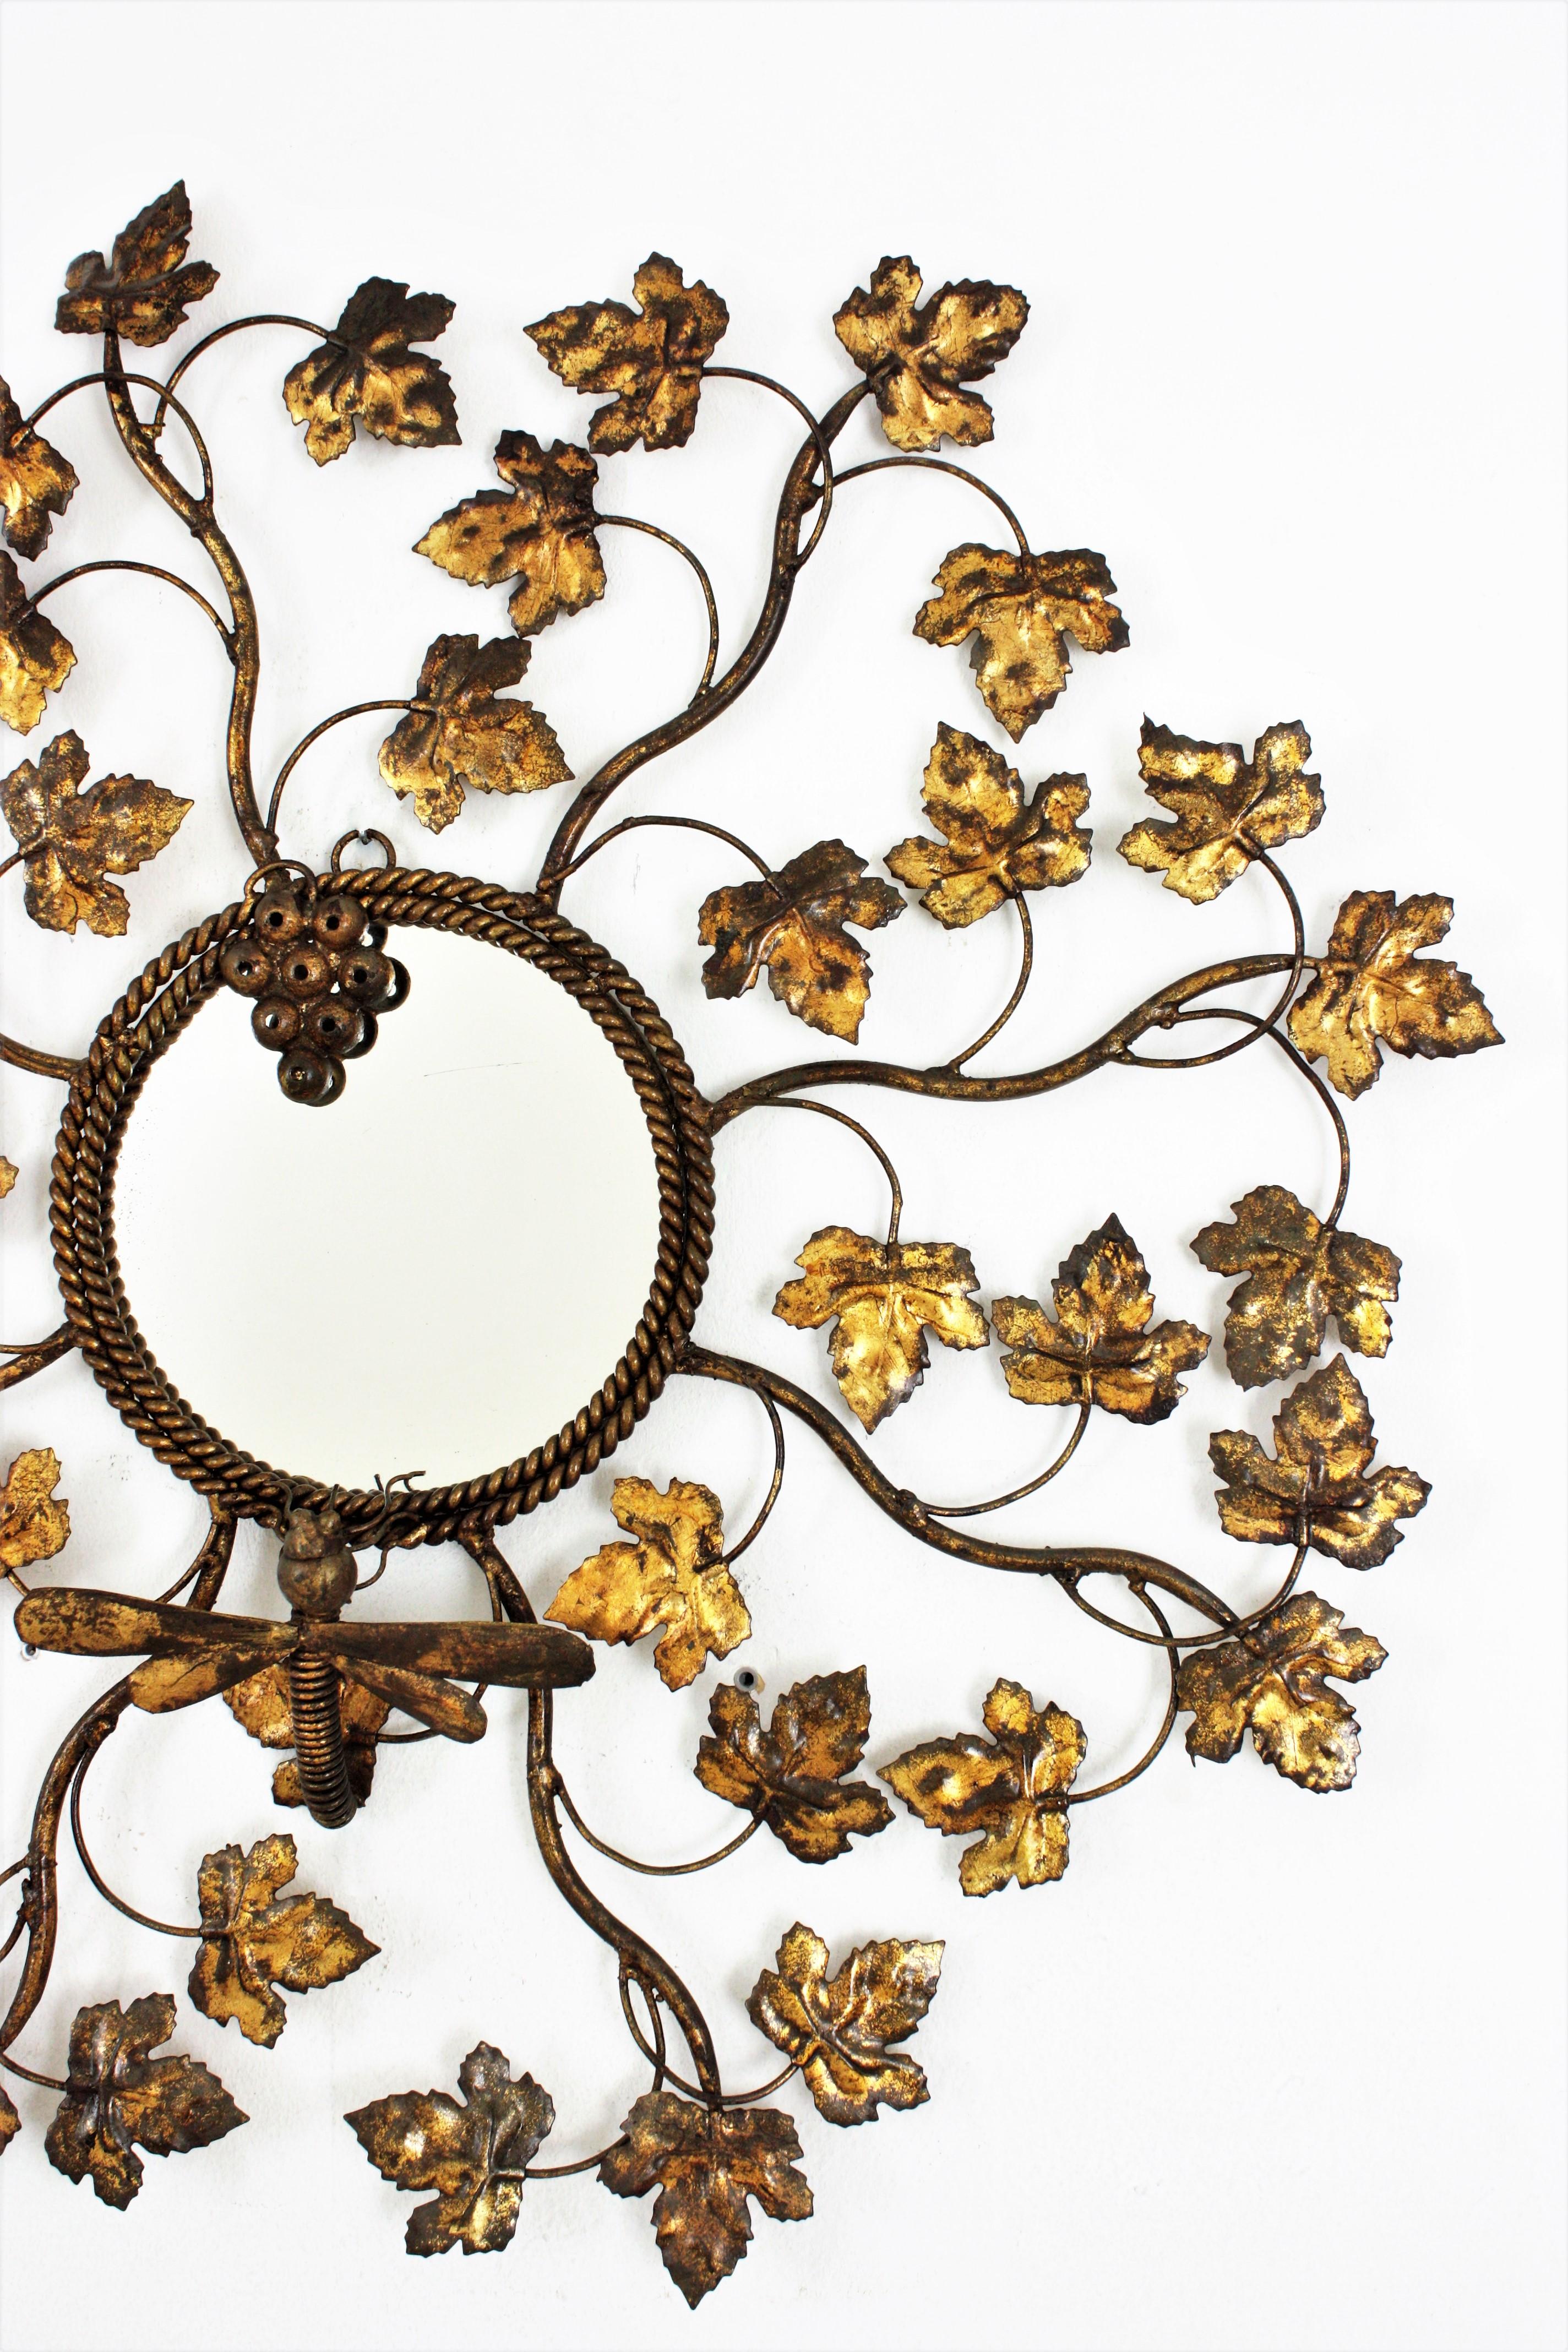 French Sunburst Foliage Mirror in Gilt Iron with Dragon Fly Motif, 1950s For Sale